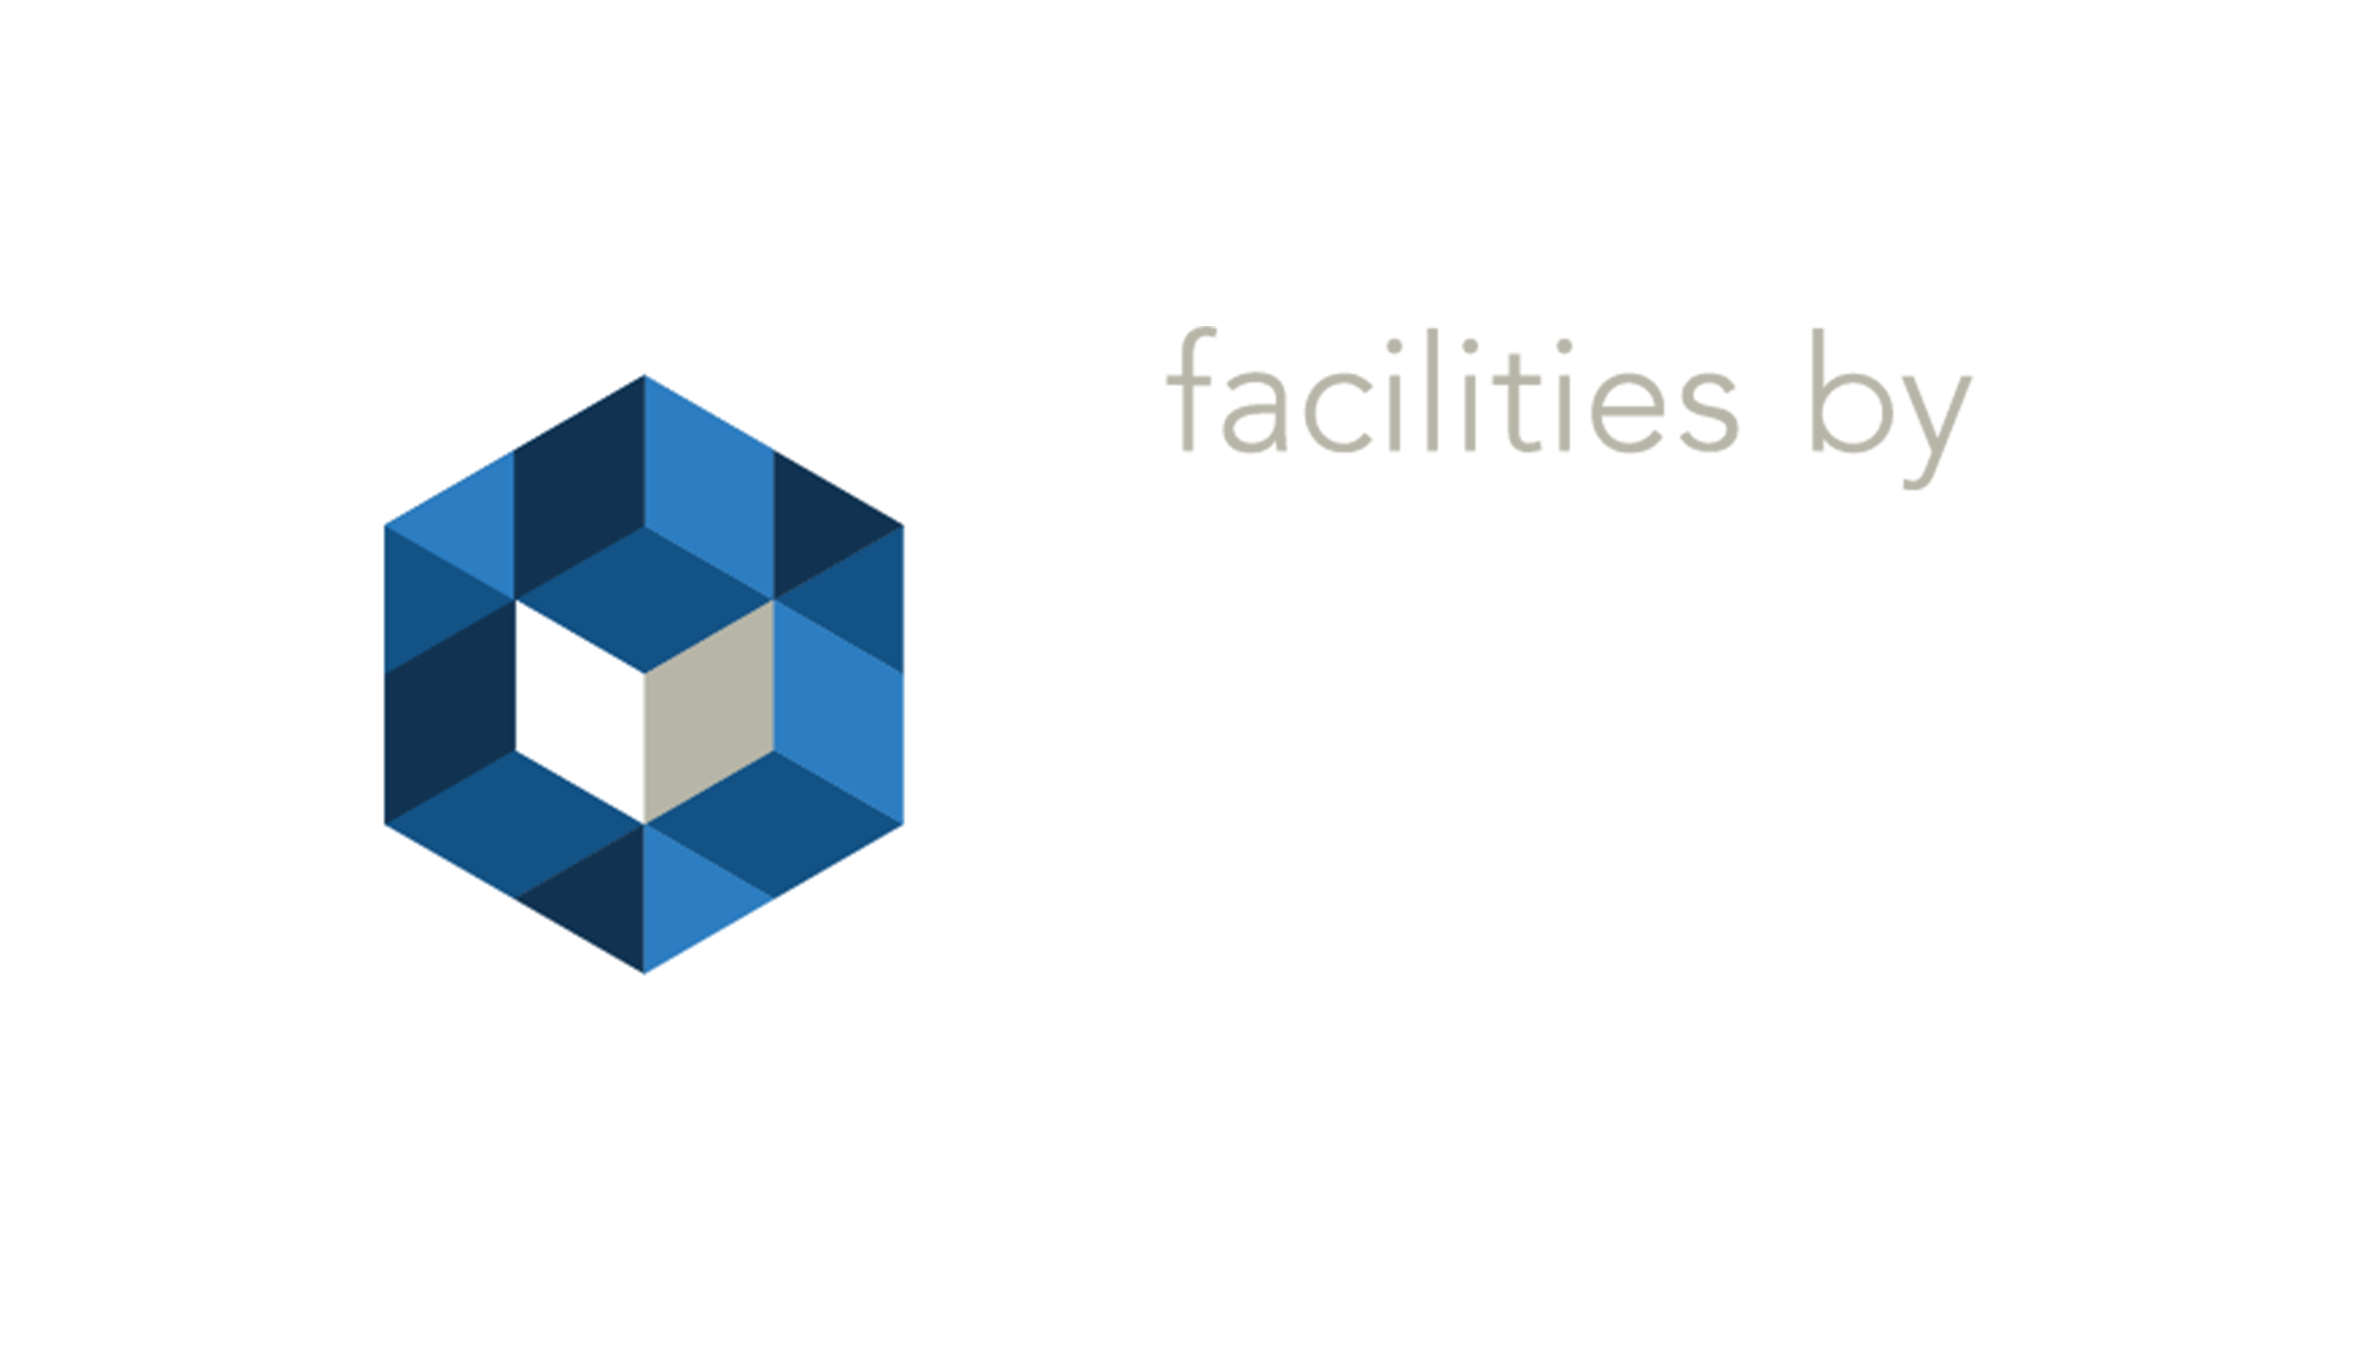 Facilities by ADF